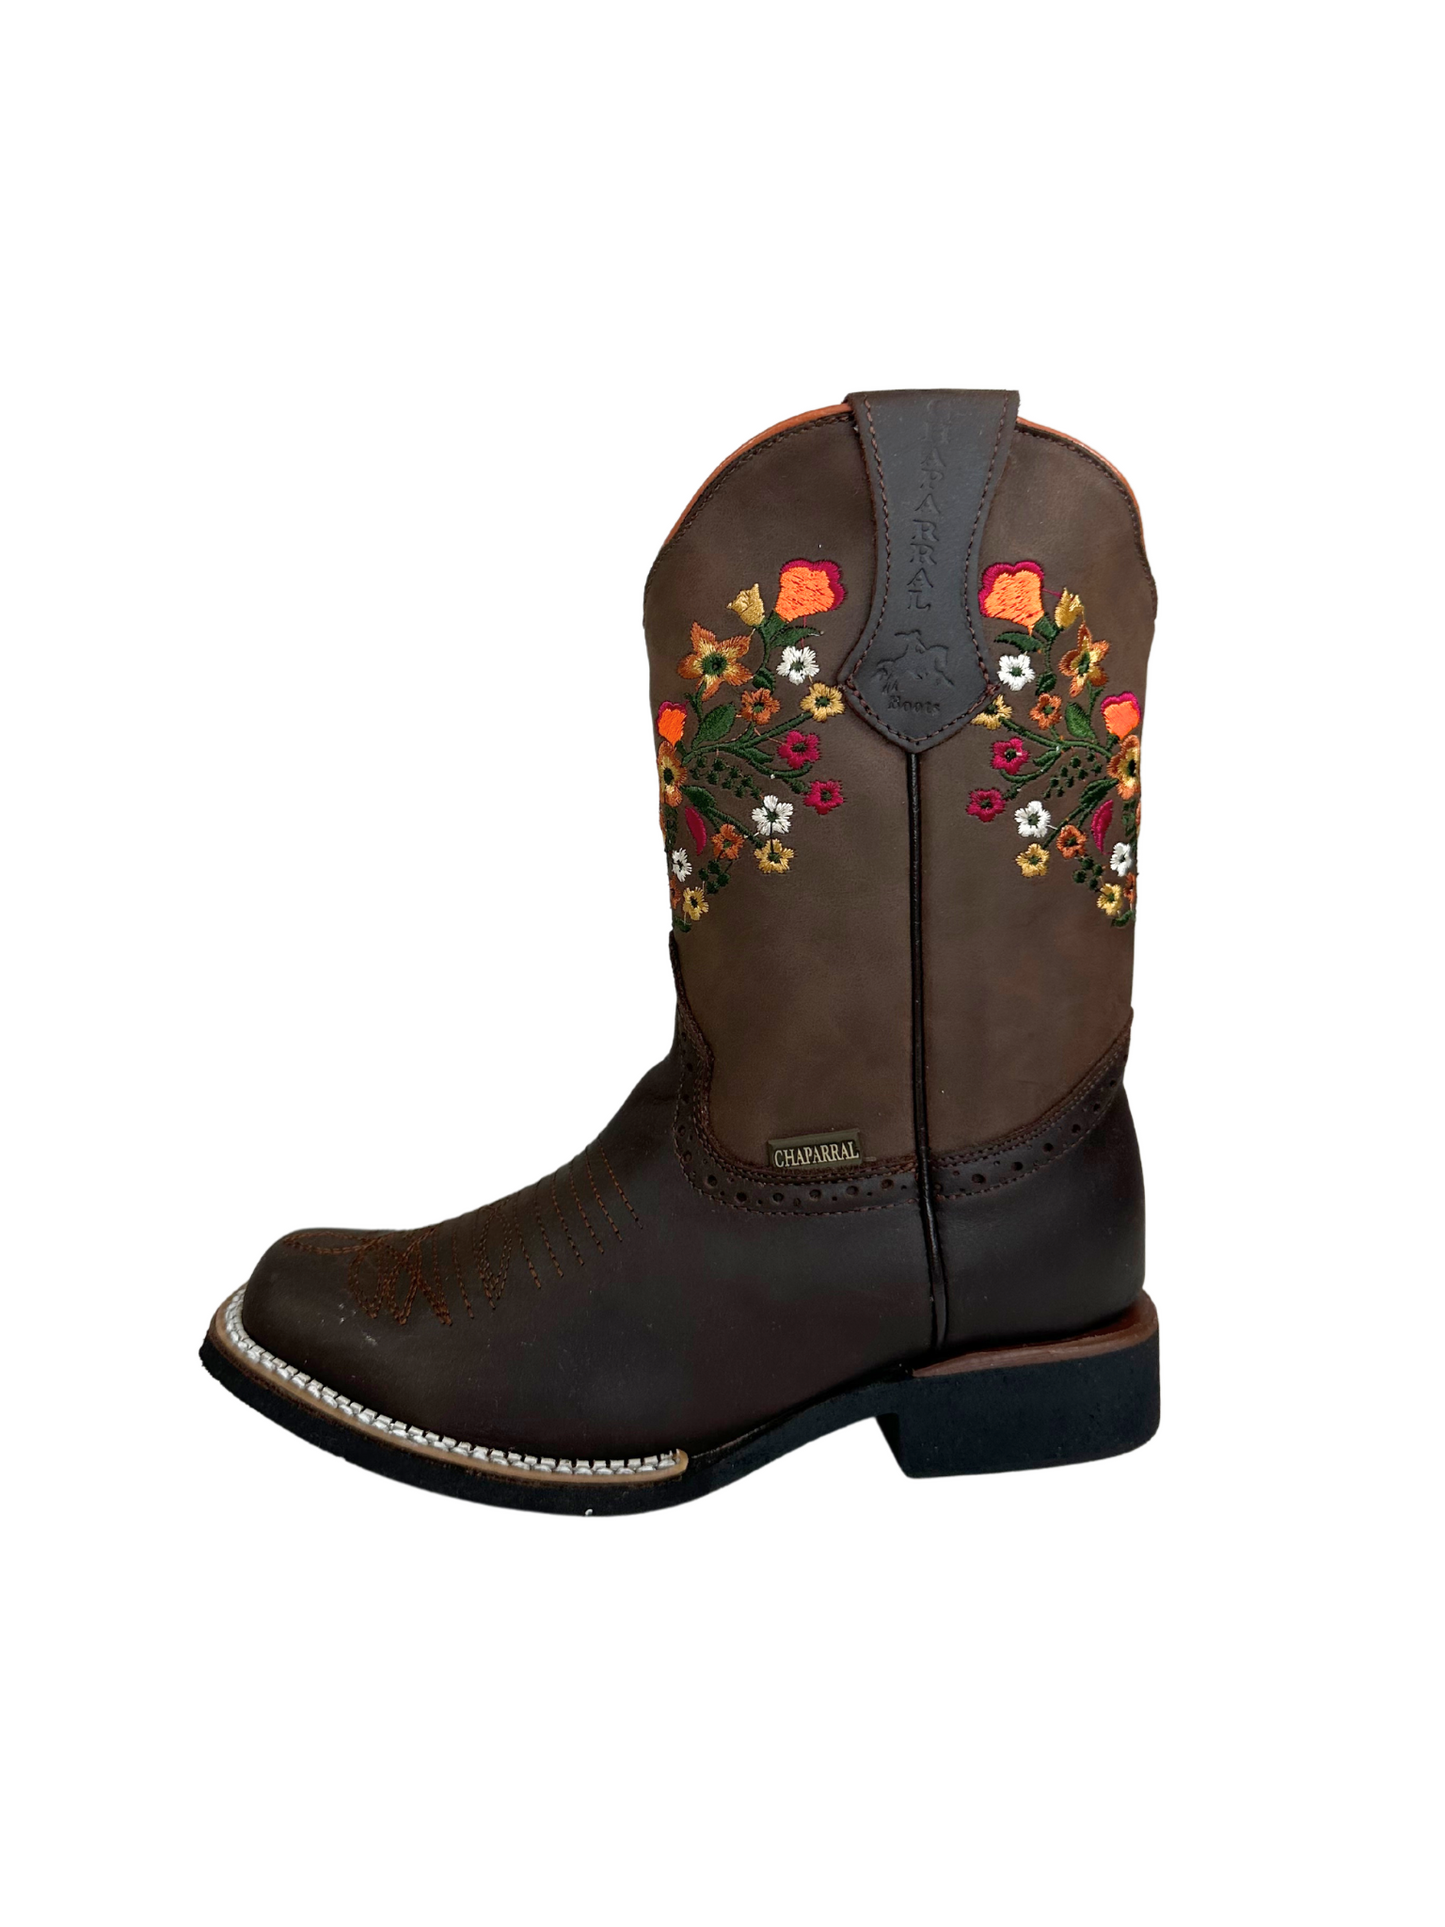 Chaparral Girl's Dark Brown Floral Boot